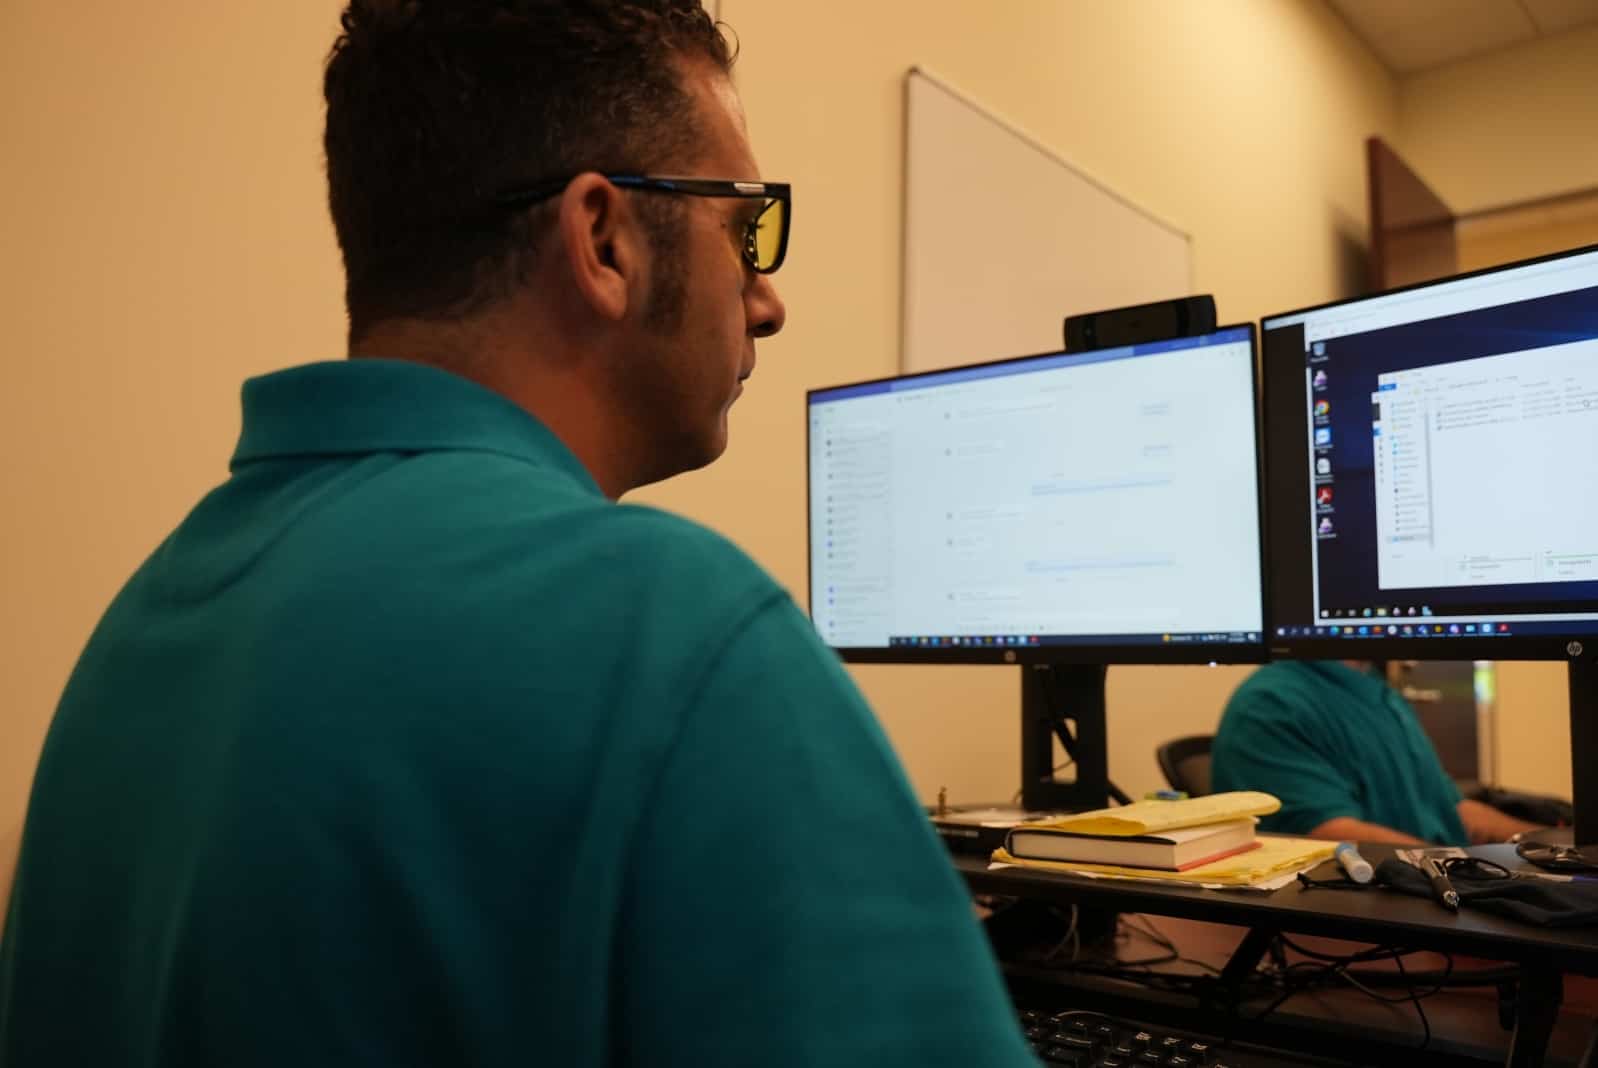 A Blue Light IT team member looking at monitors looking at cloud computing options for a client.